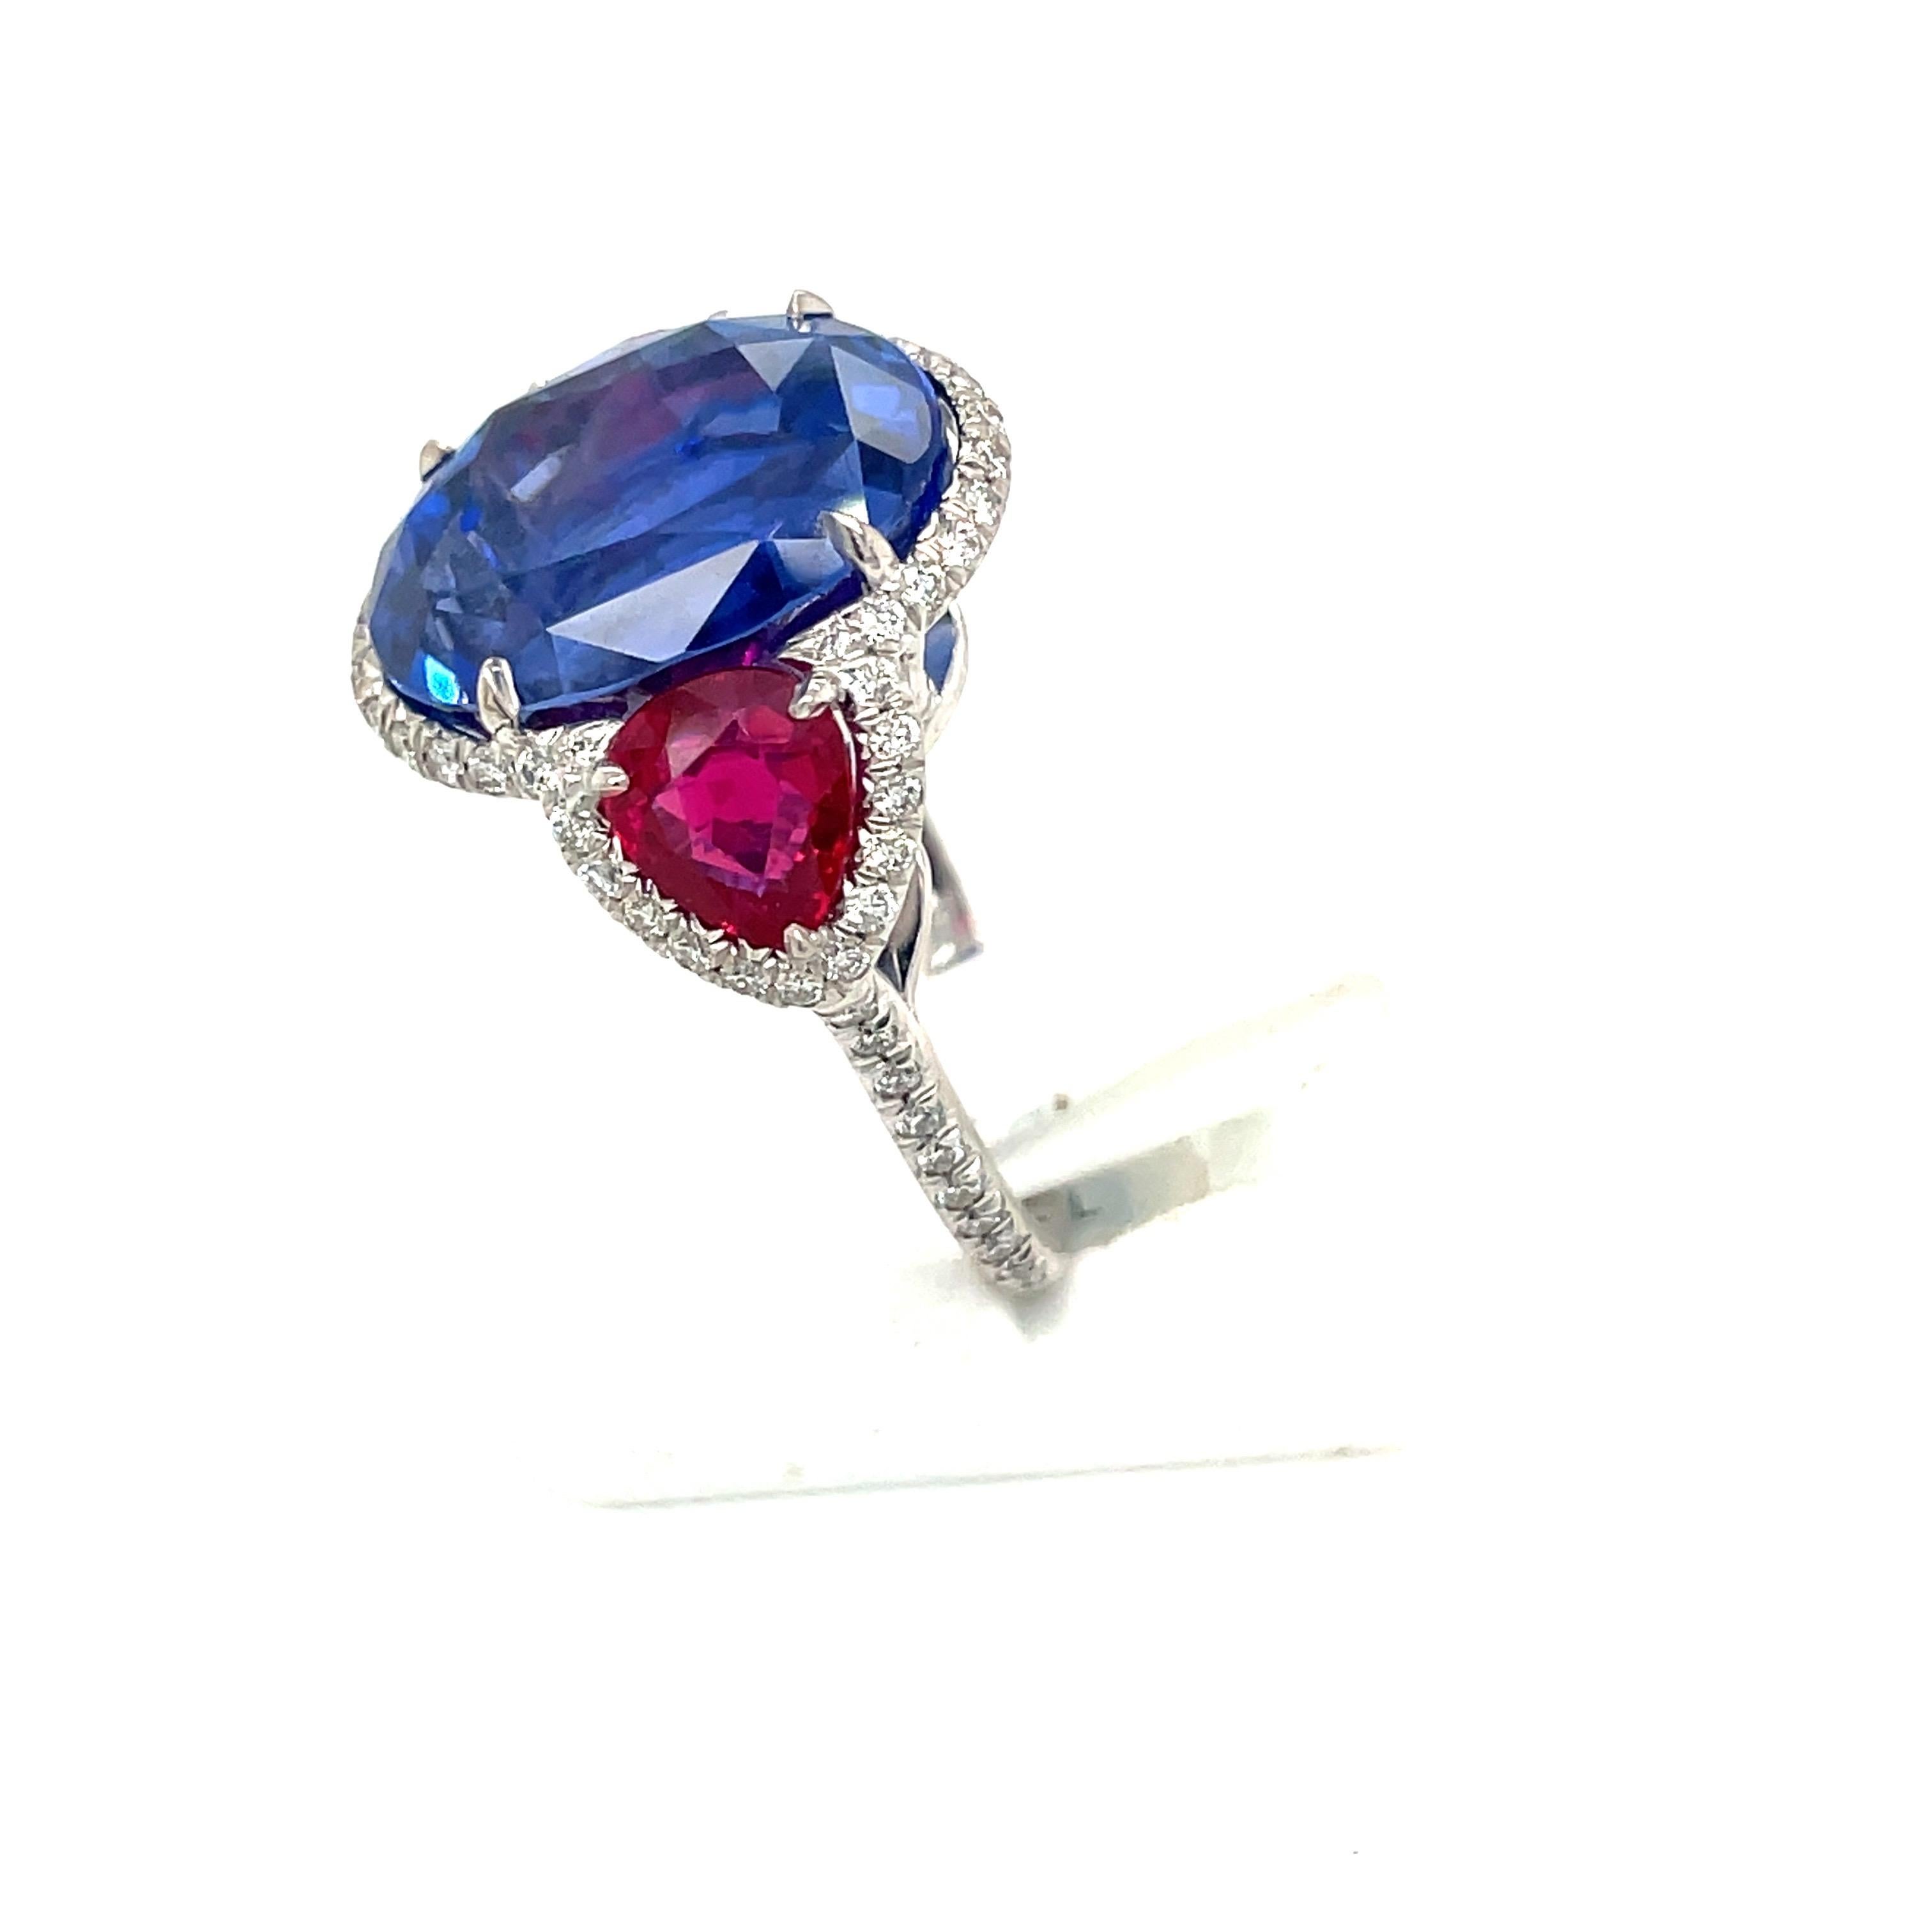 Contemporary 13.26 Carat Ceylon Sapphire with AGL Certified Burma Rubies For Sale